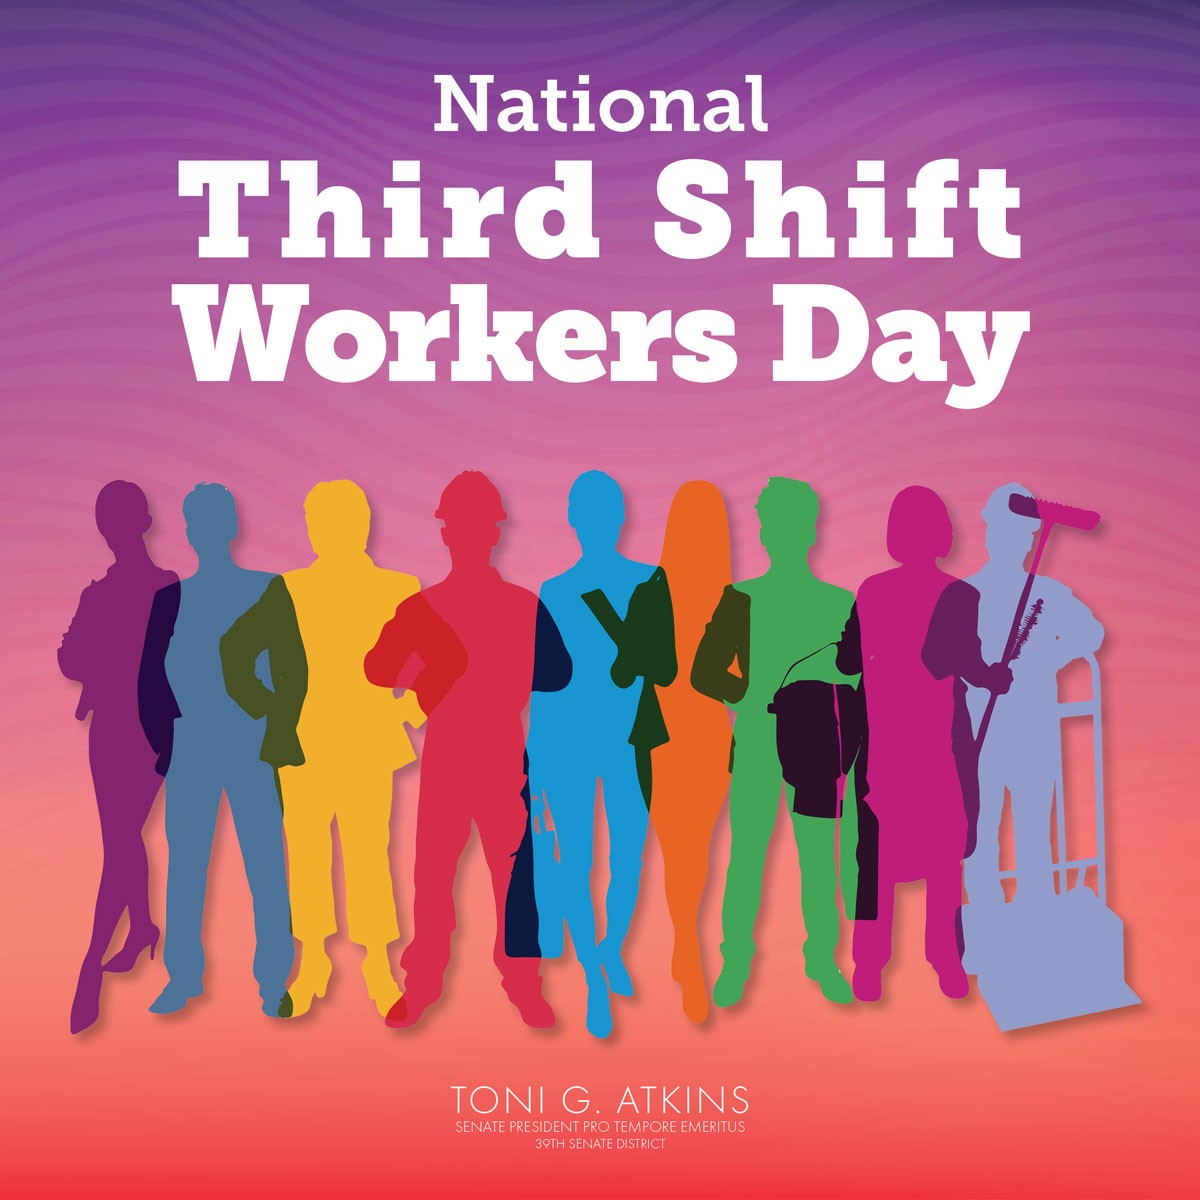 On #ThirdShiftWorkersDay, I’m grateful to the workers who keep our communities and businesses running and respond to emergencies while most of the world is asleep. Working nights can be difficult, but the work is essential. Thank you, third shift workers!